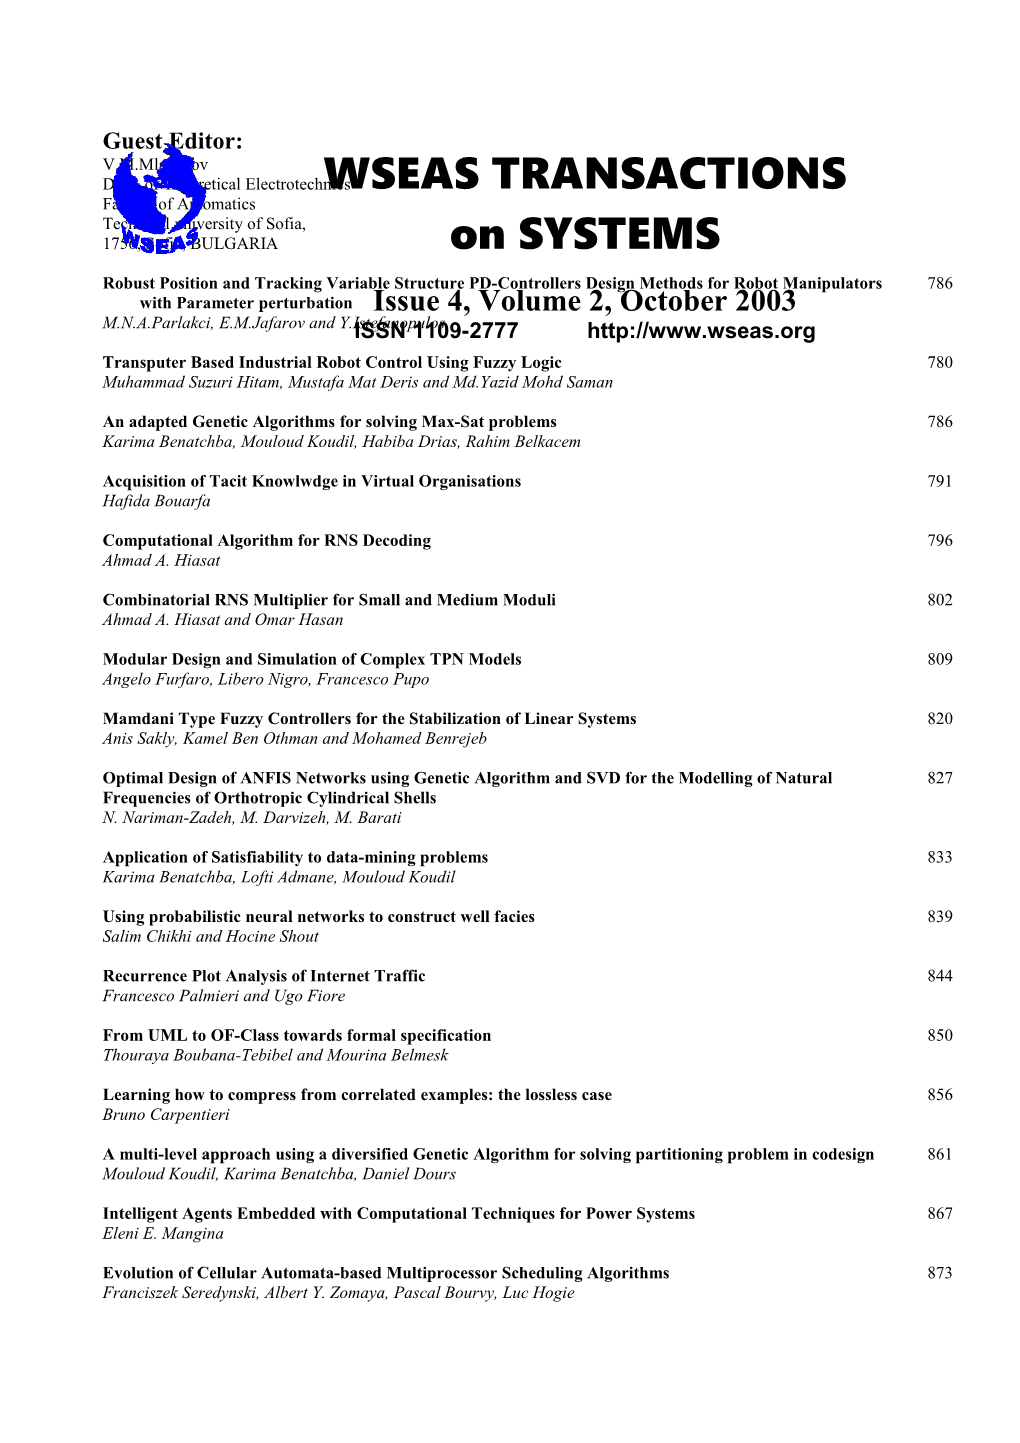 WSEAS Trans. on SYSTEMS, October 2003